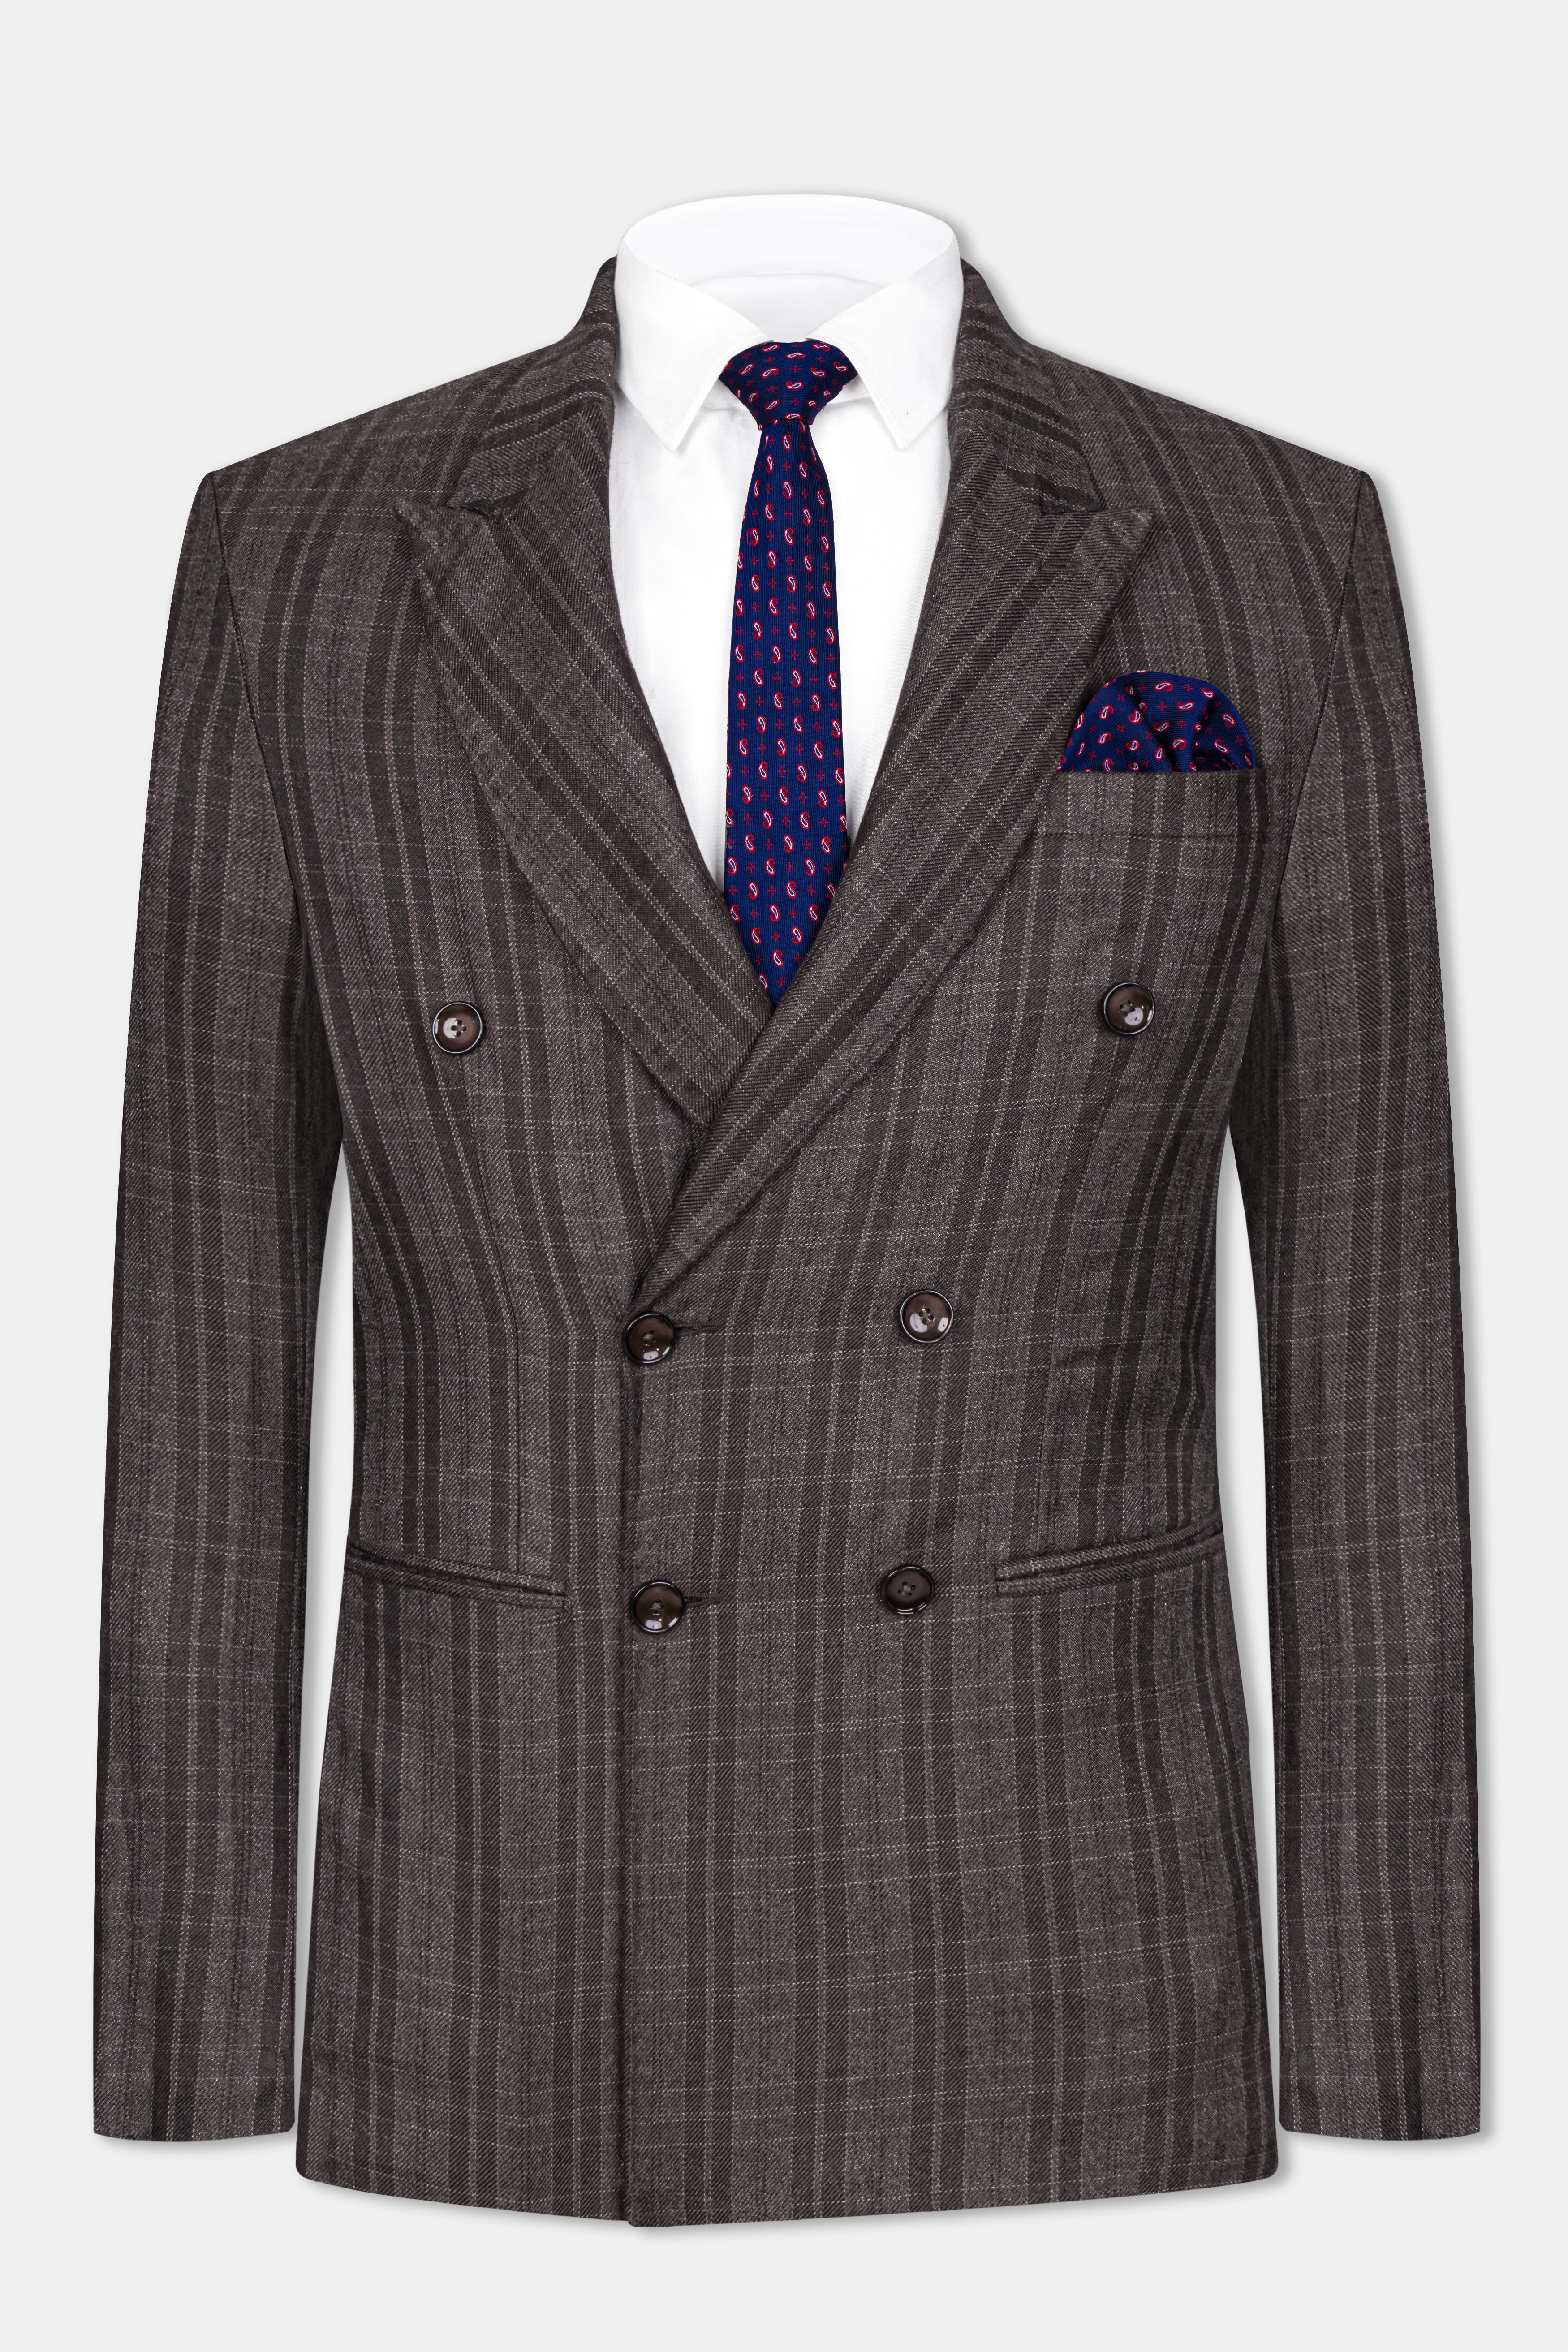 Thunder Brown Plaid Tweed Double Breasted Blazer